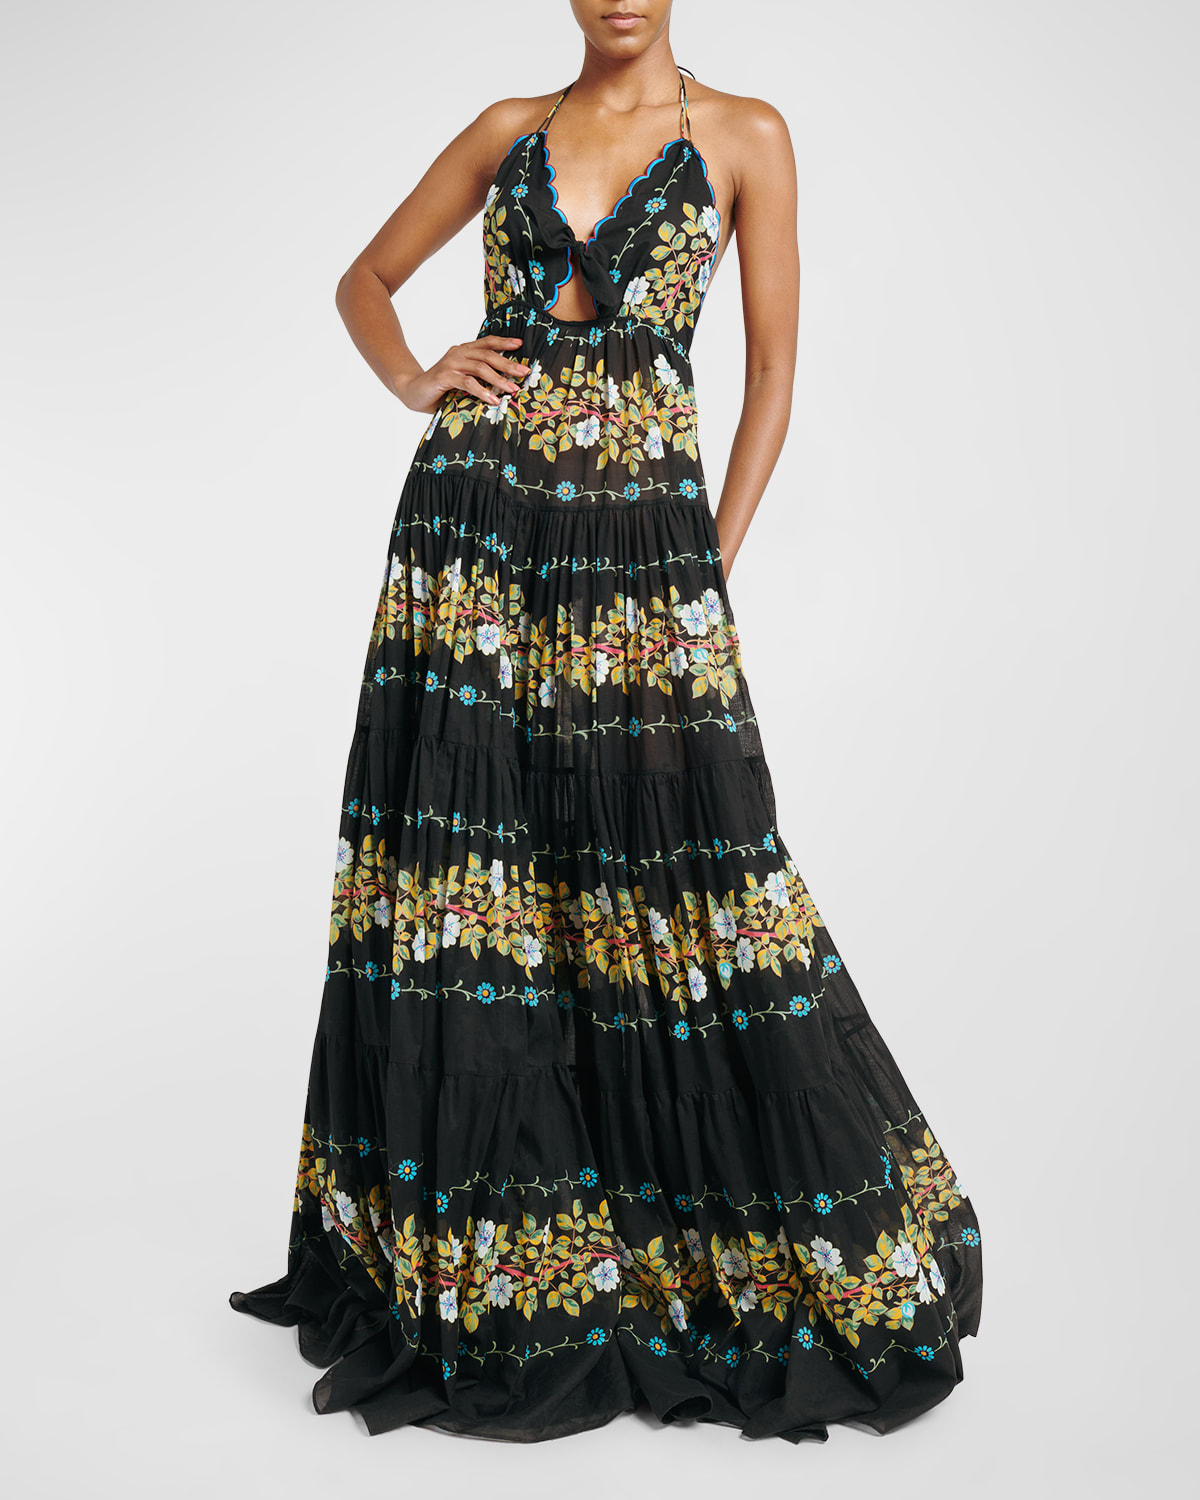 ETRO TIERED EMBROIDERED SANGALLO LACE HALTER GOWN